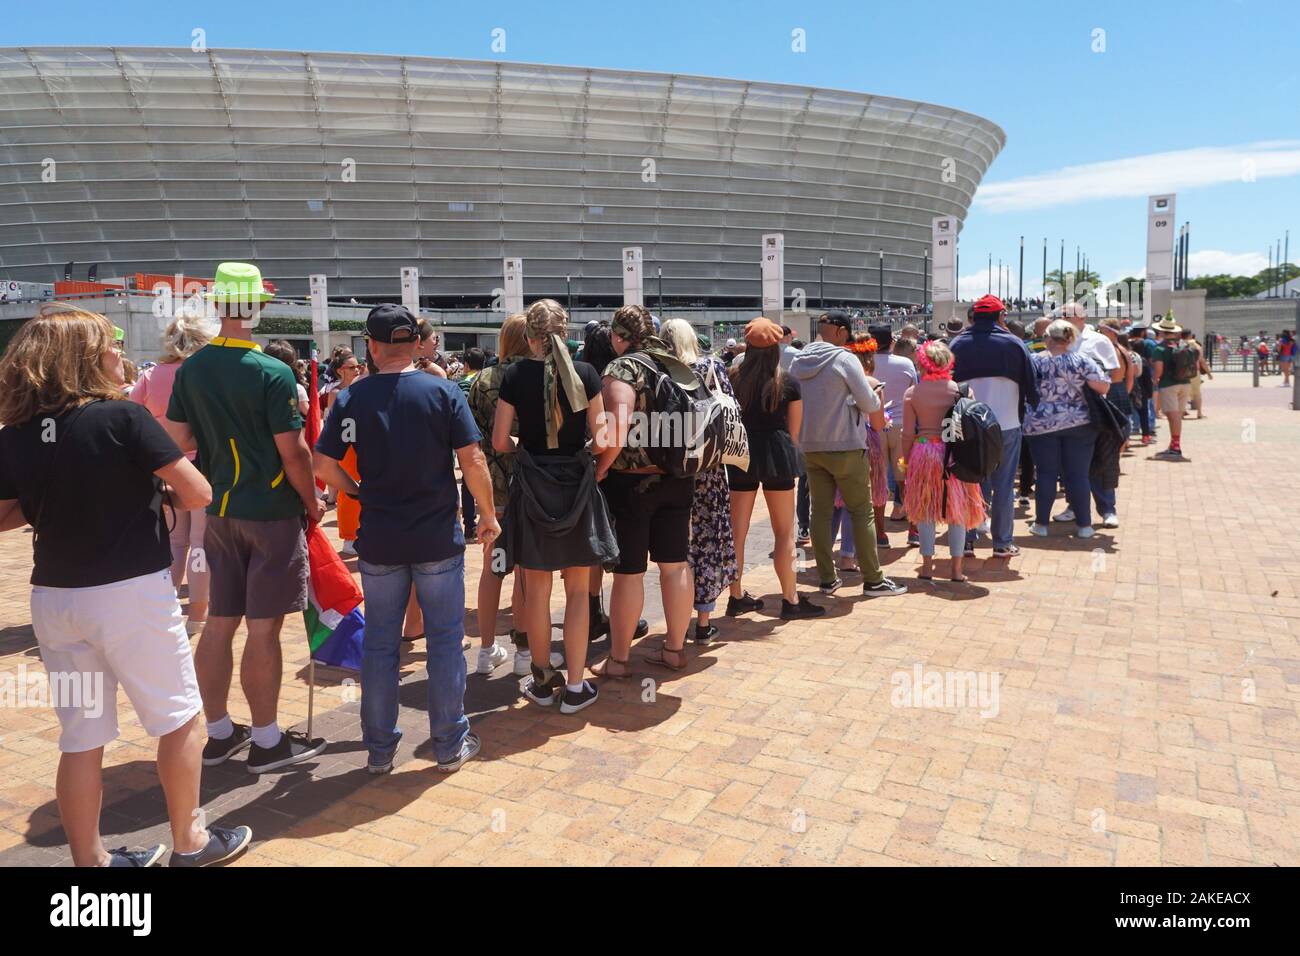 people, fans, supporters of international rugby sevens tournament form a queue outside the Cape Town stadium in Green Point for the final day match Stock Photo